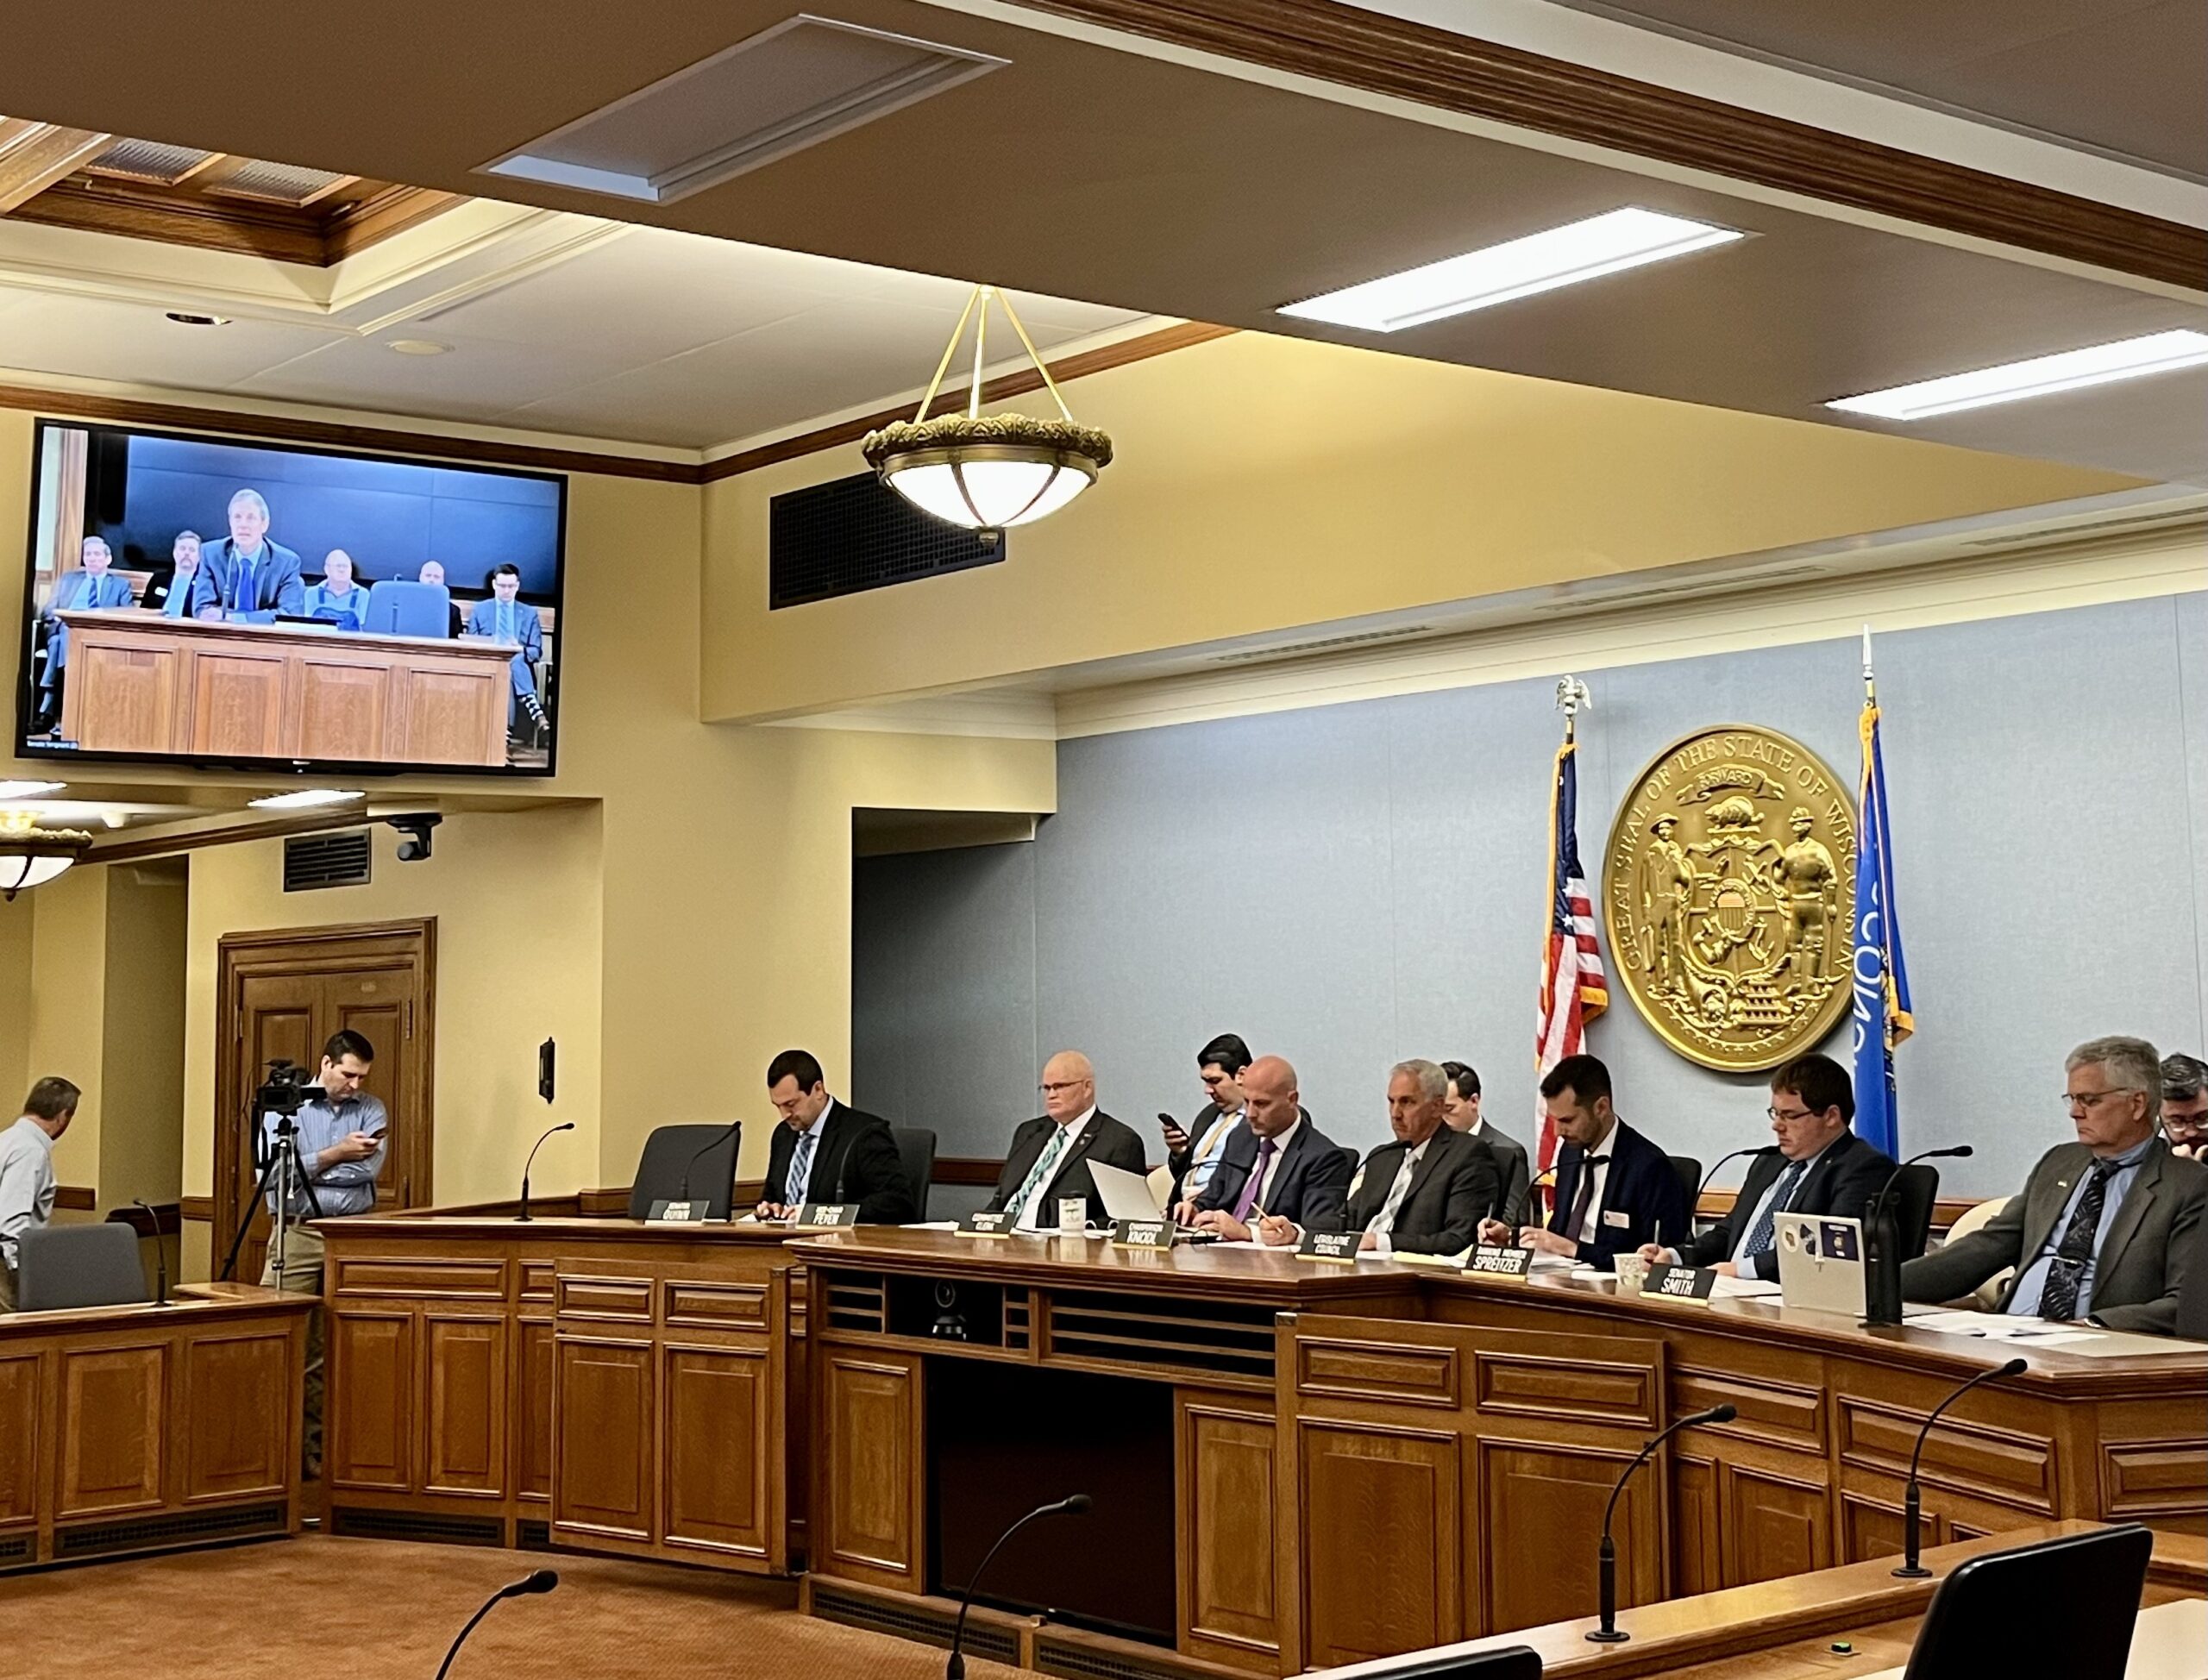 Members of the Wisconsin Senate Committee on Shared Revenue, Elections and Consumer Protection hear testimony from William Jones, Mequon's city administrator